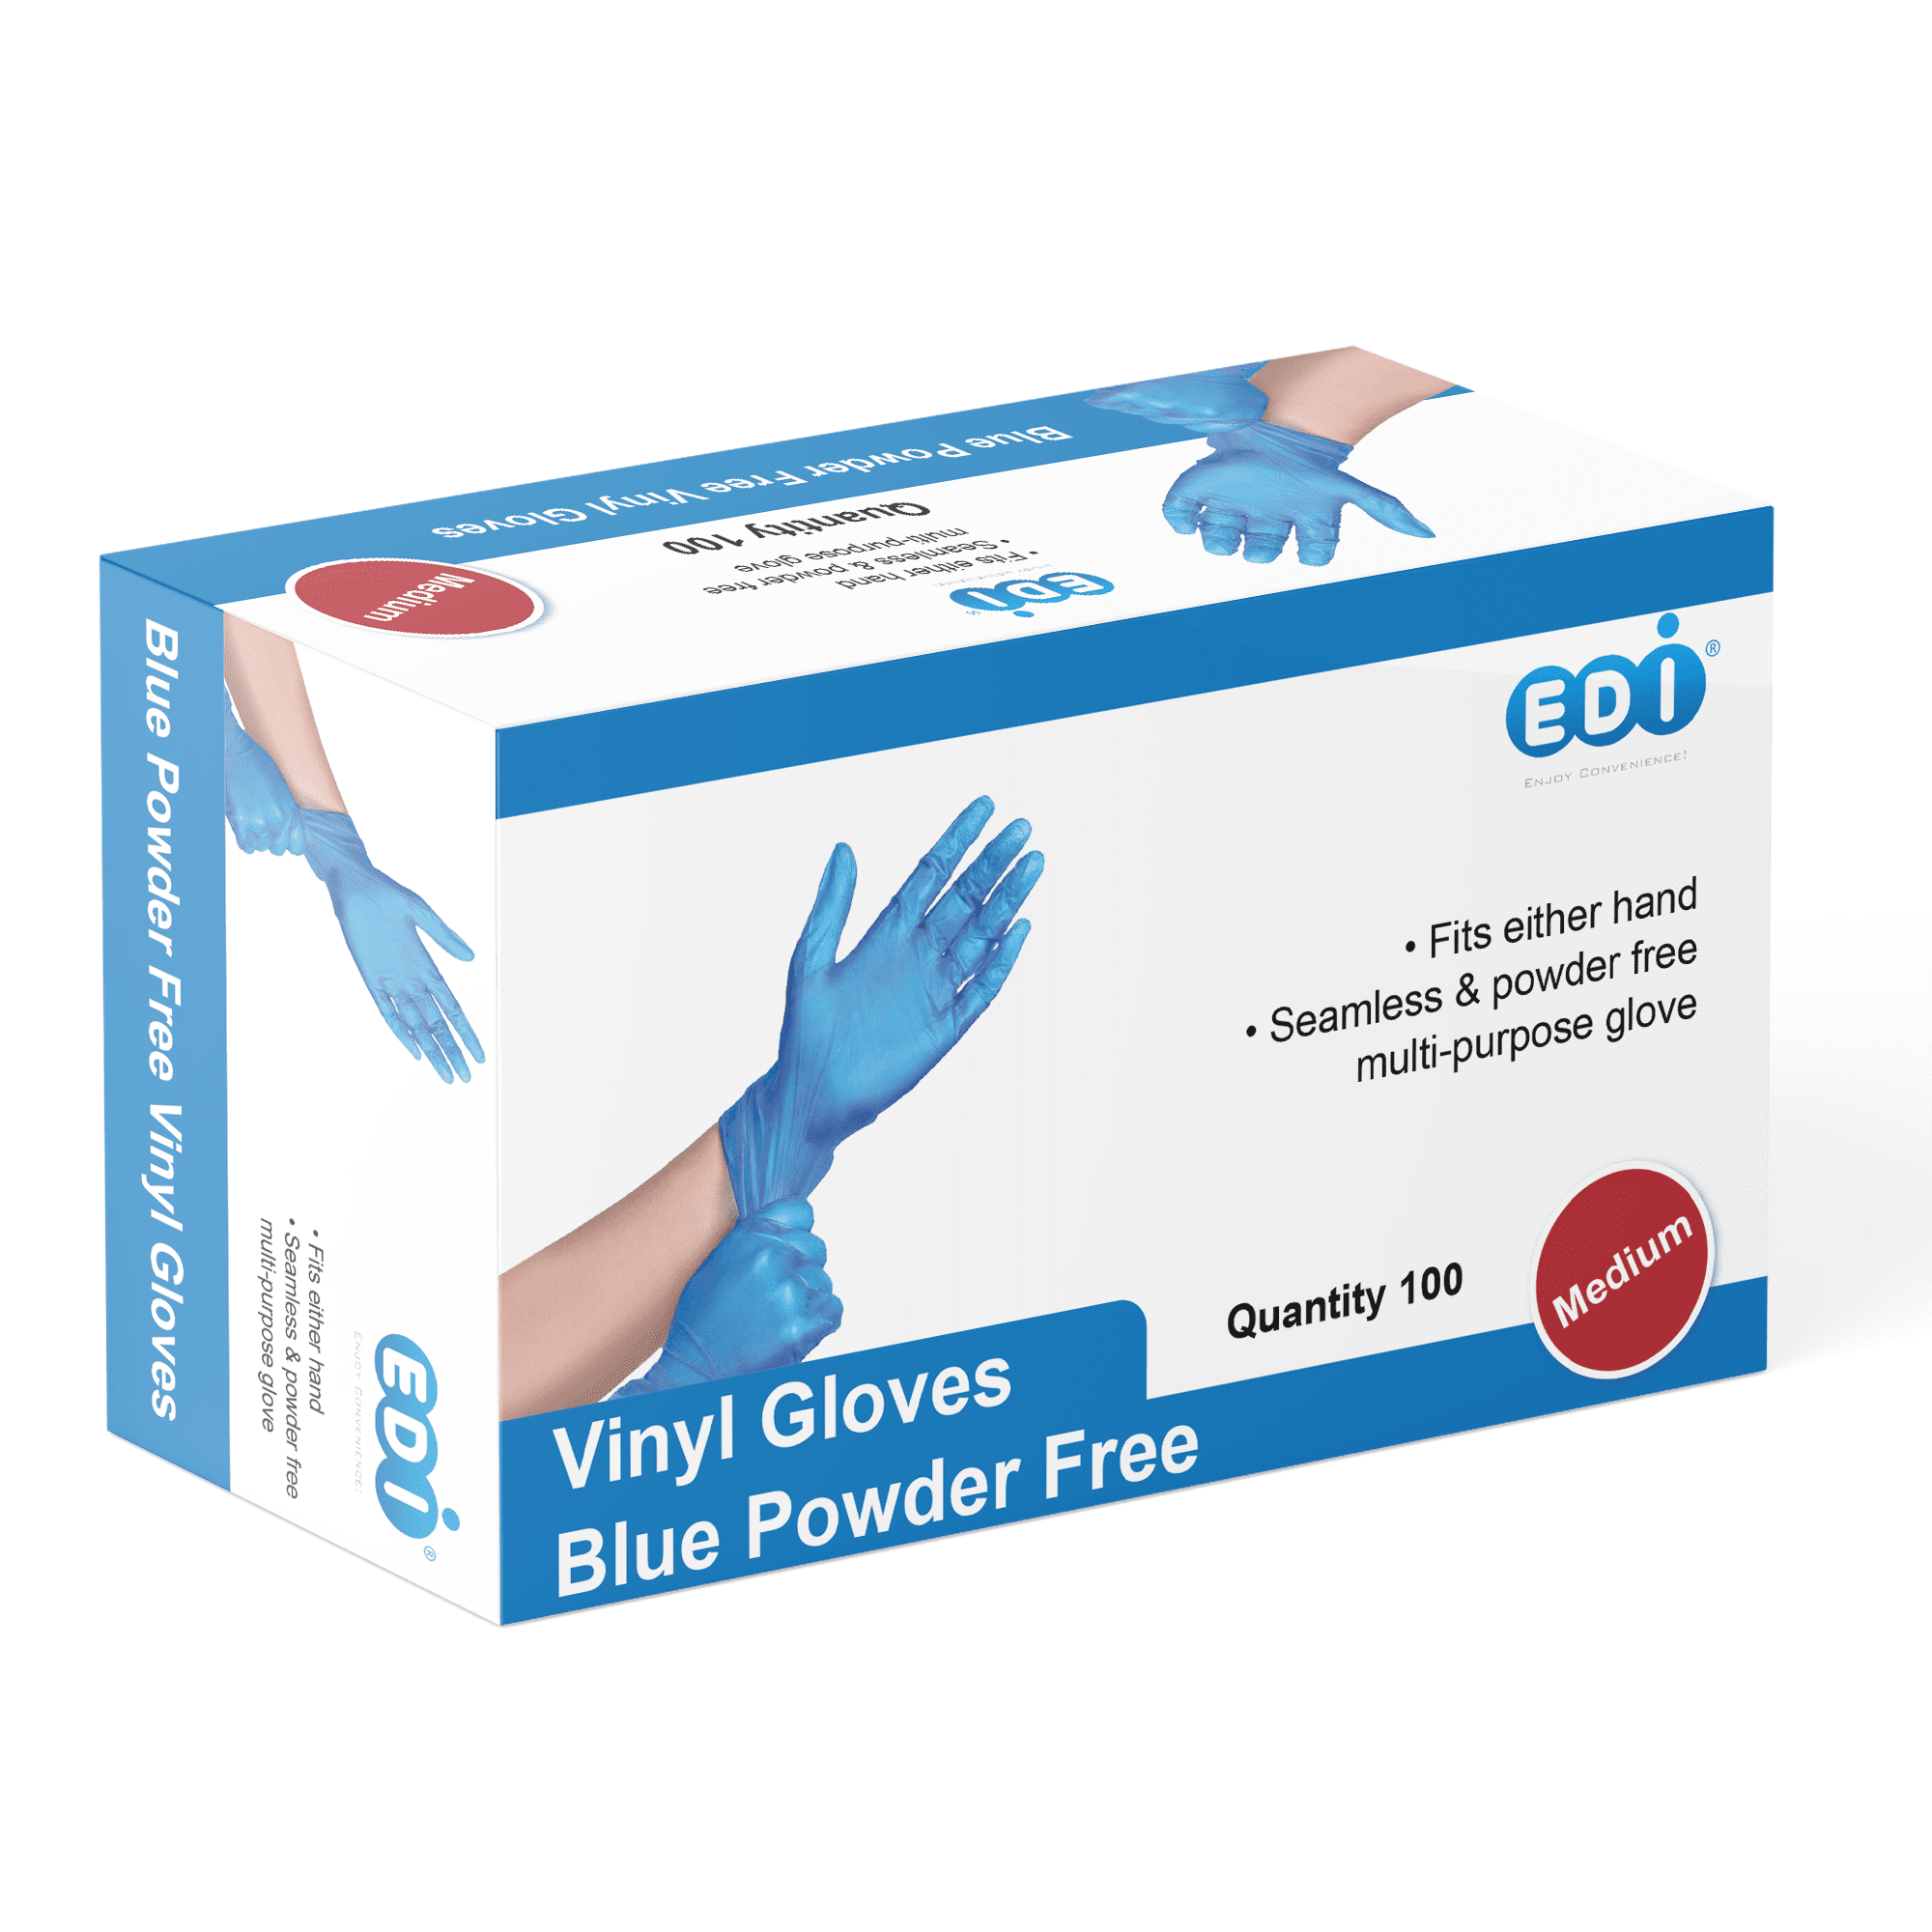 100 LATEX POWDER FREE GLOVES DISPOSABLE BLUE VINYL BOX OF SIZE L LARGE 50 PAIRS 